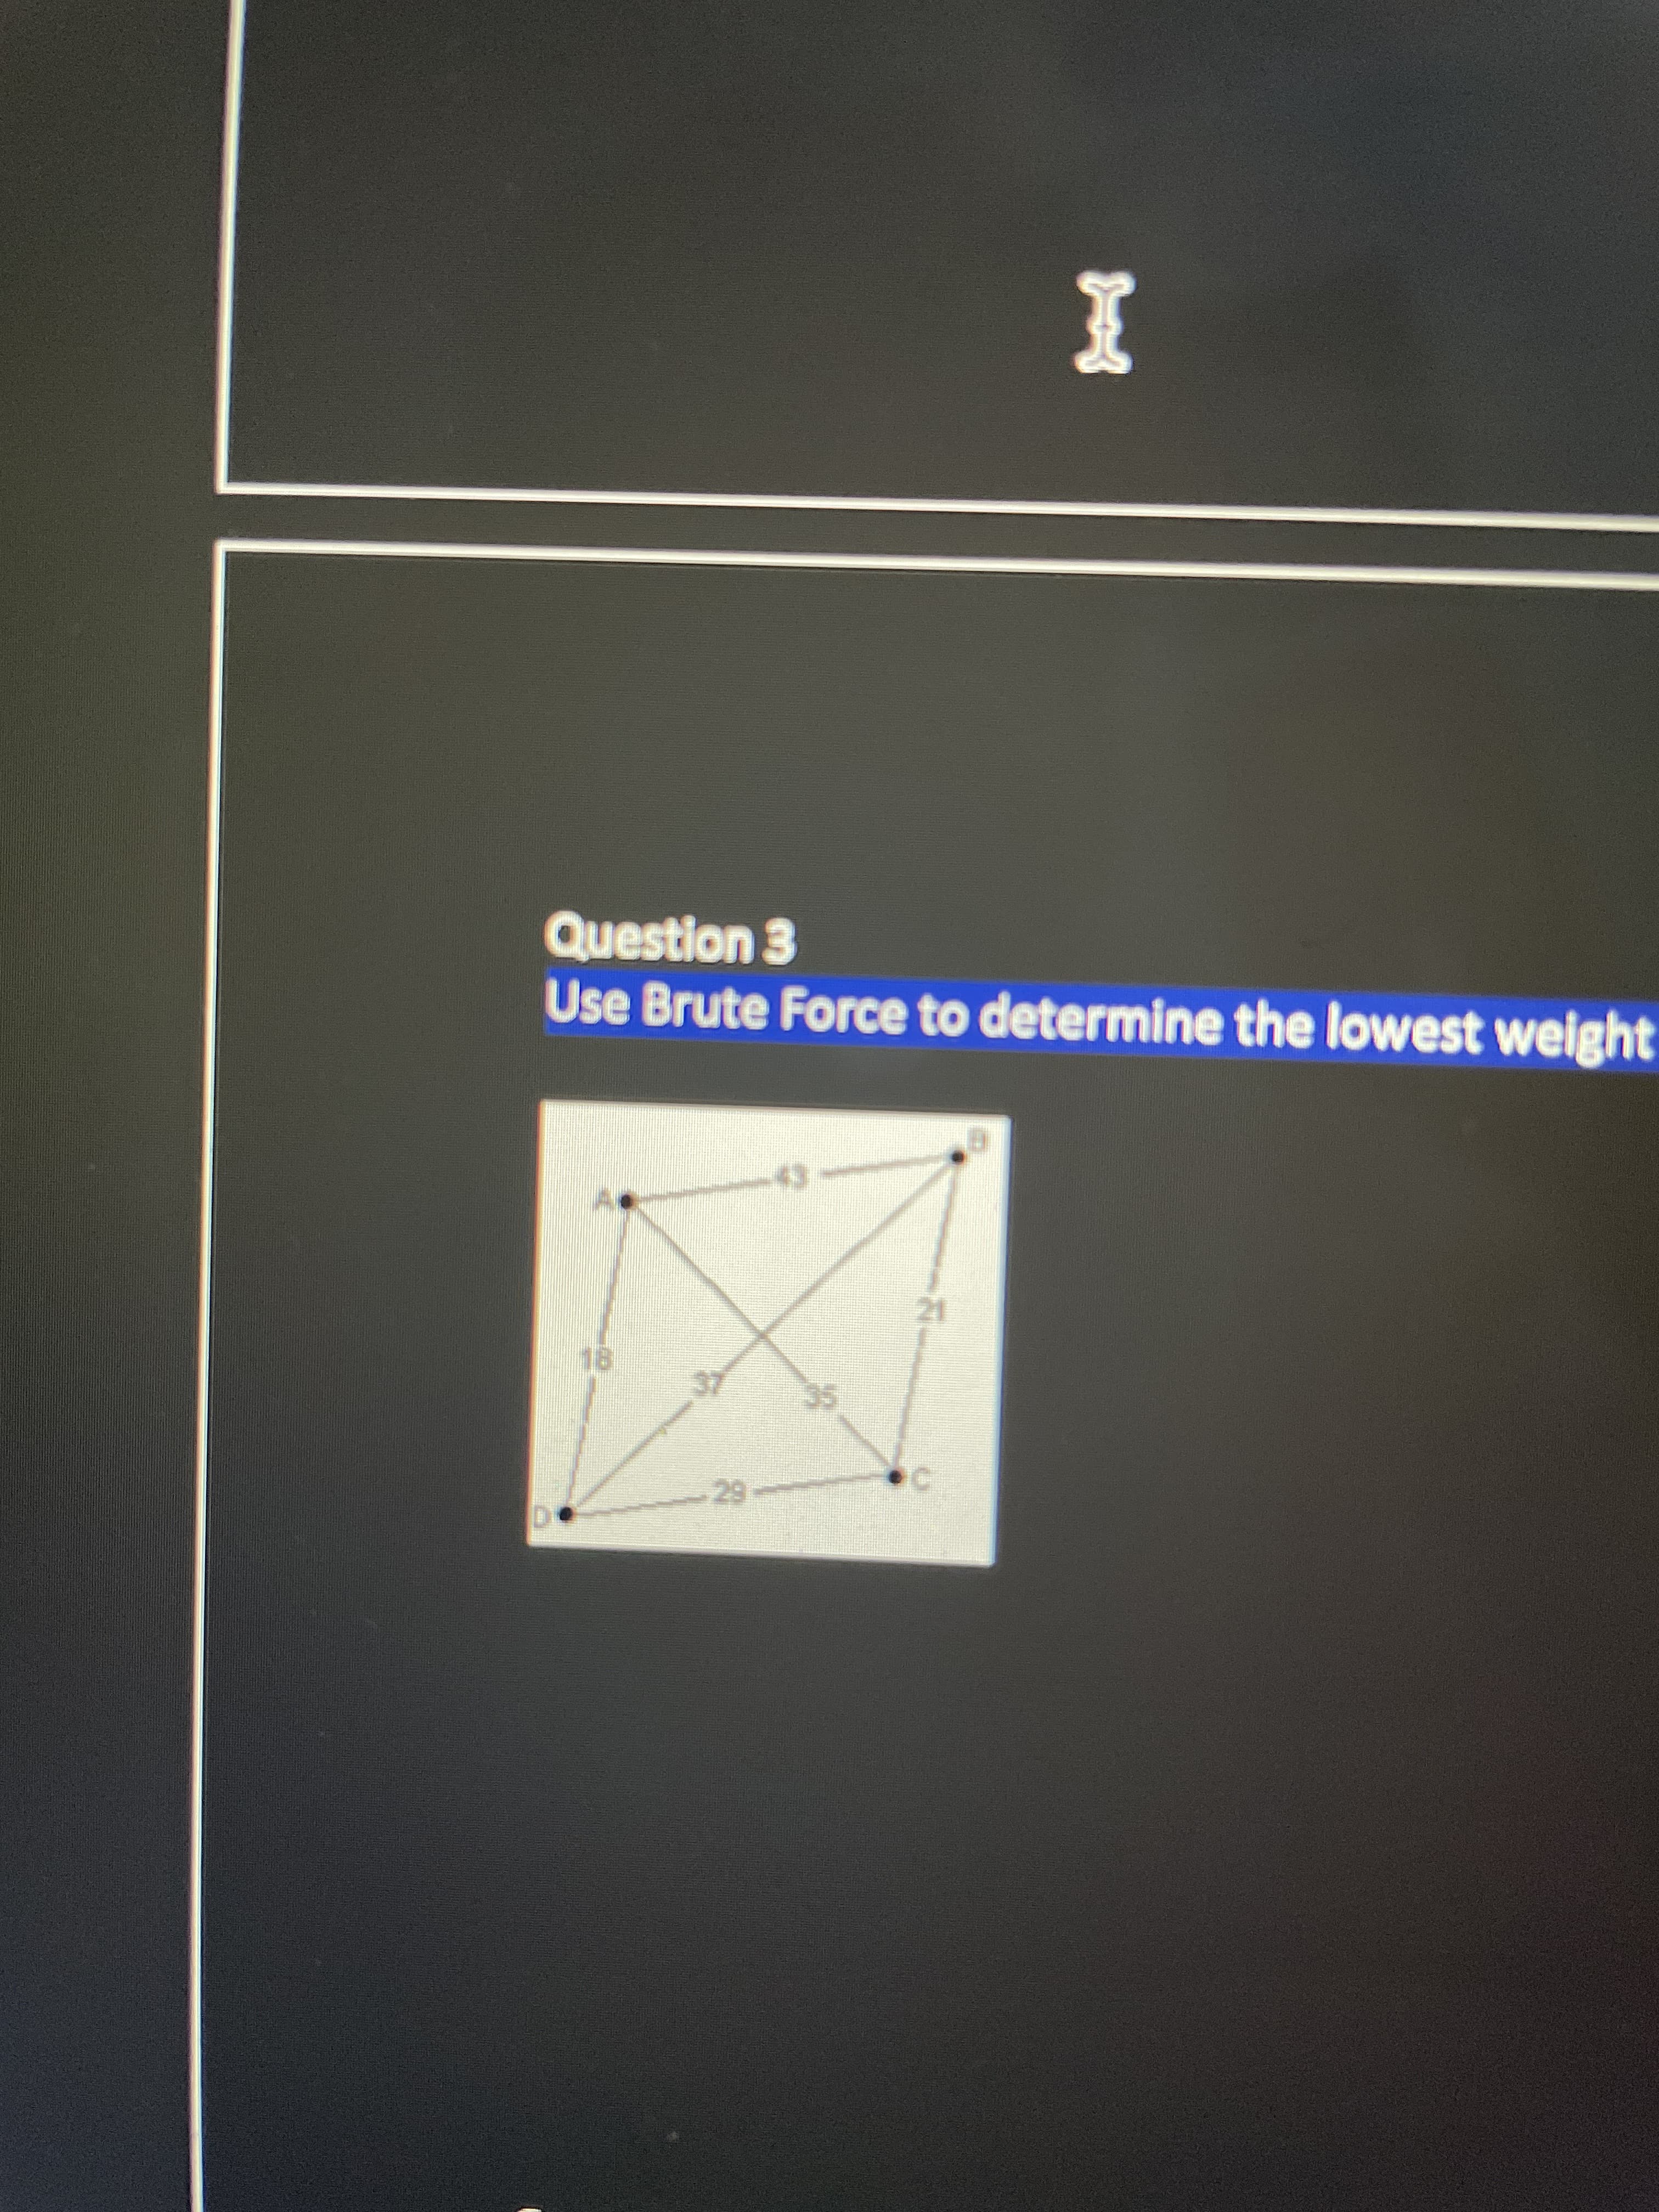 Question 3
Use Brute Force to determine the lowest weight
18.
